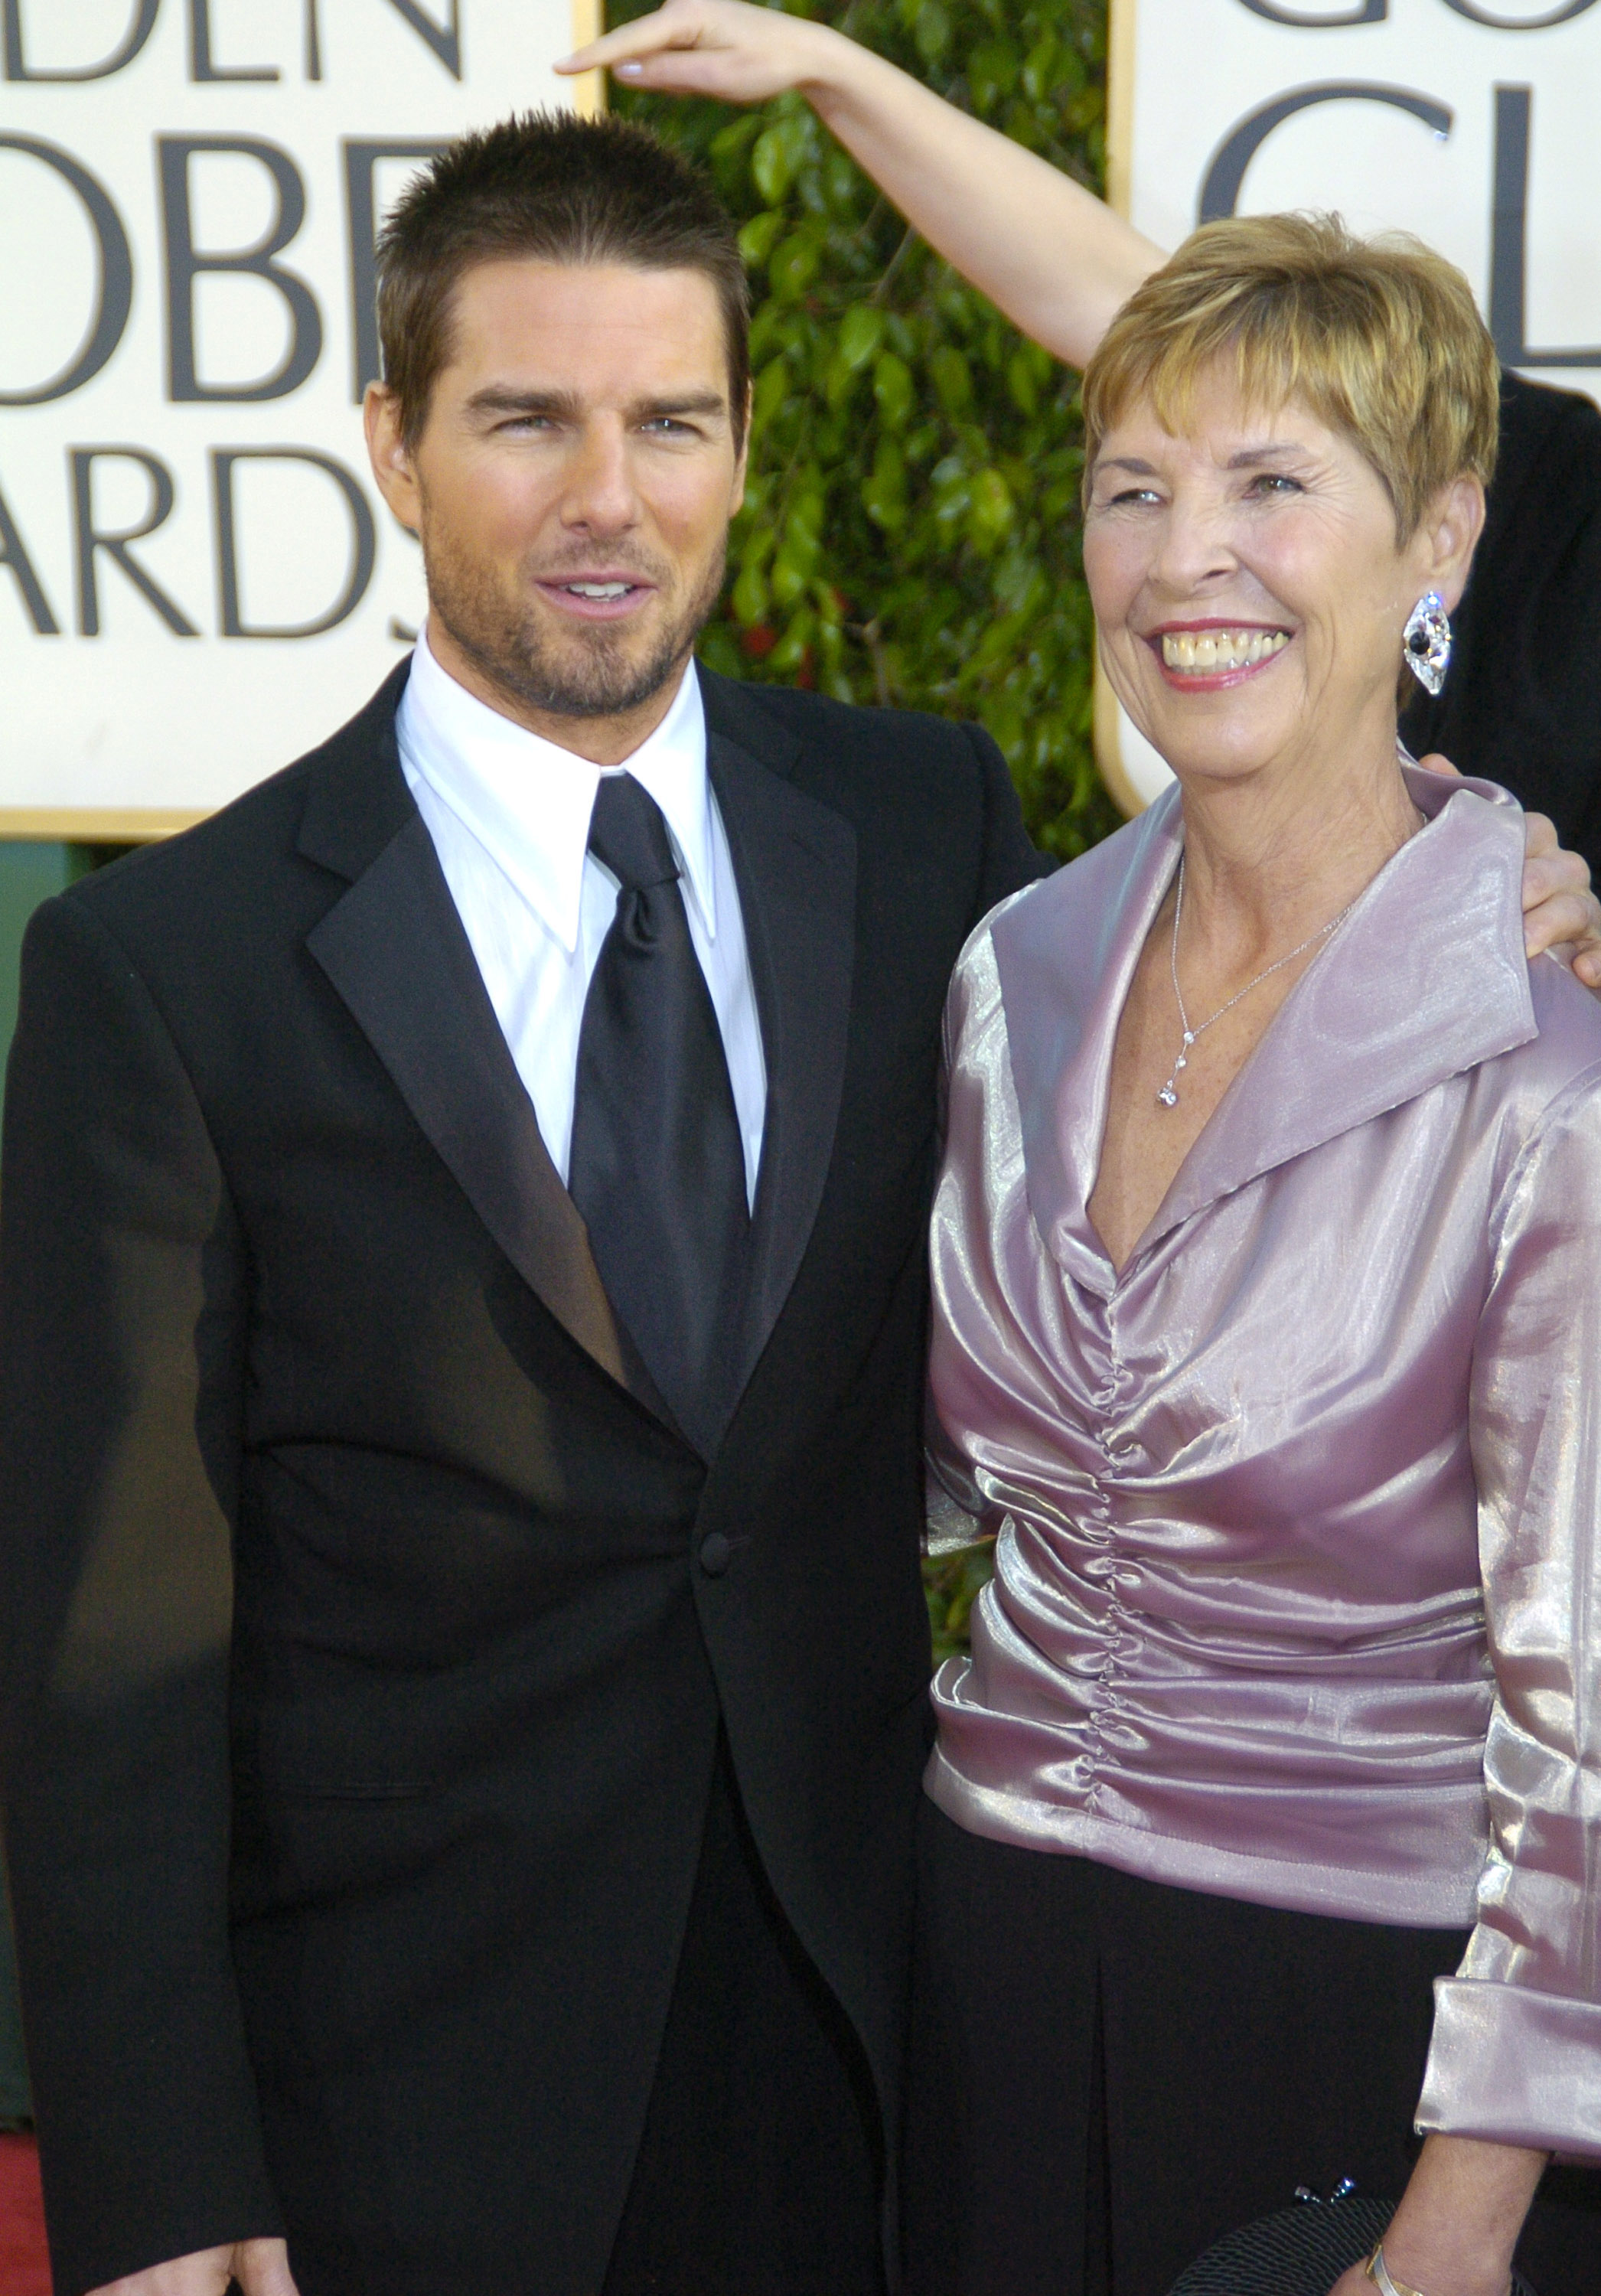 Tom Cruise and Mary Lee South at the The 61st Annual Golden Globe Awards - Arrivals in Beverly Hills, California, on January 25, 2004. | Source: Getty Images